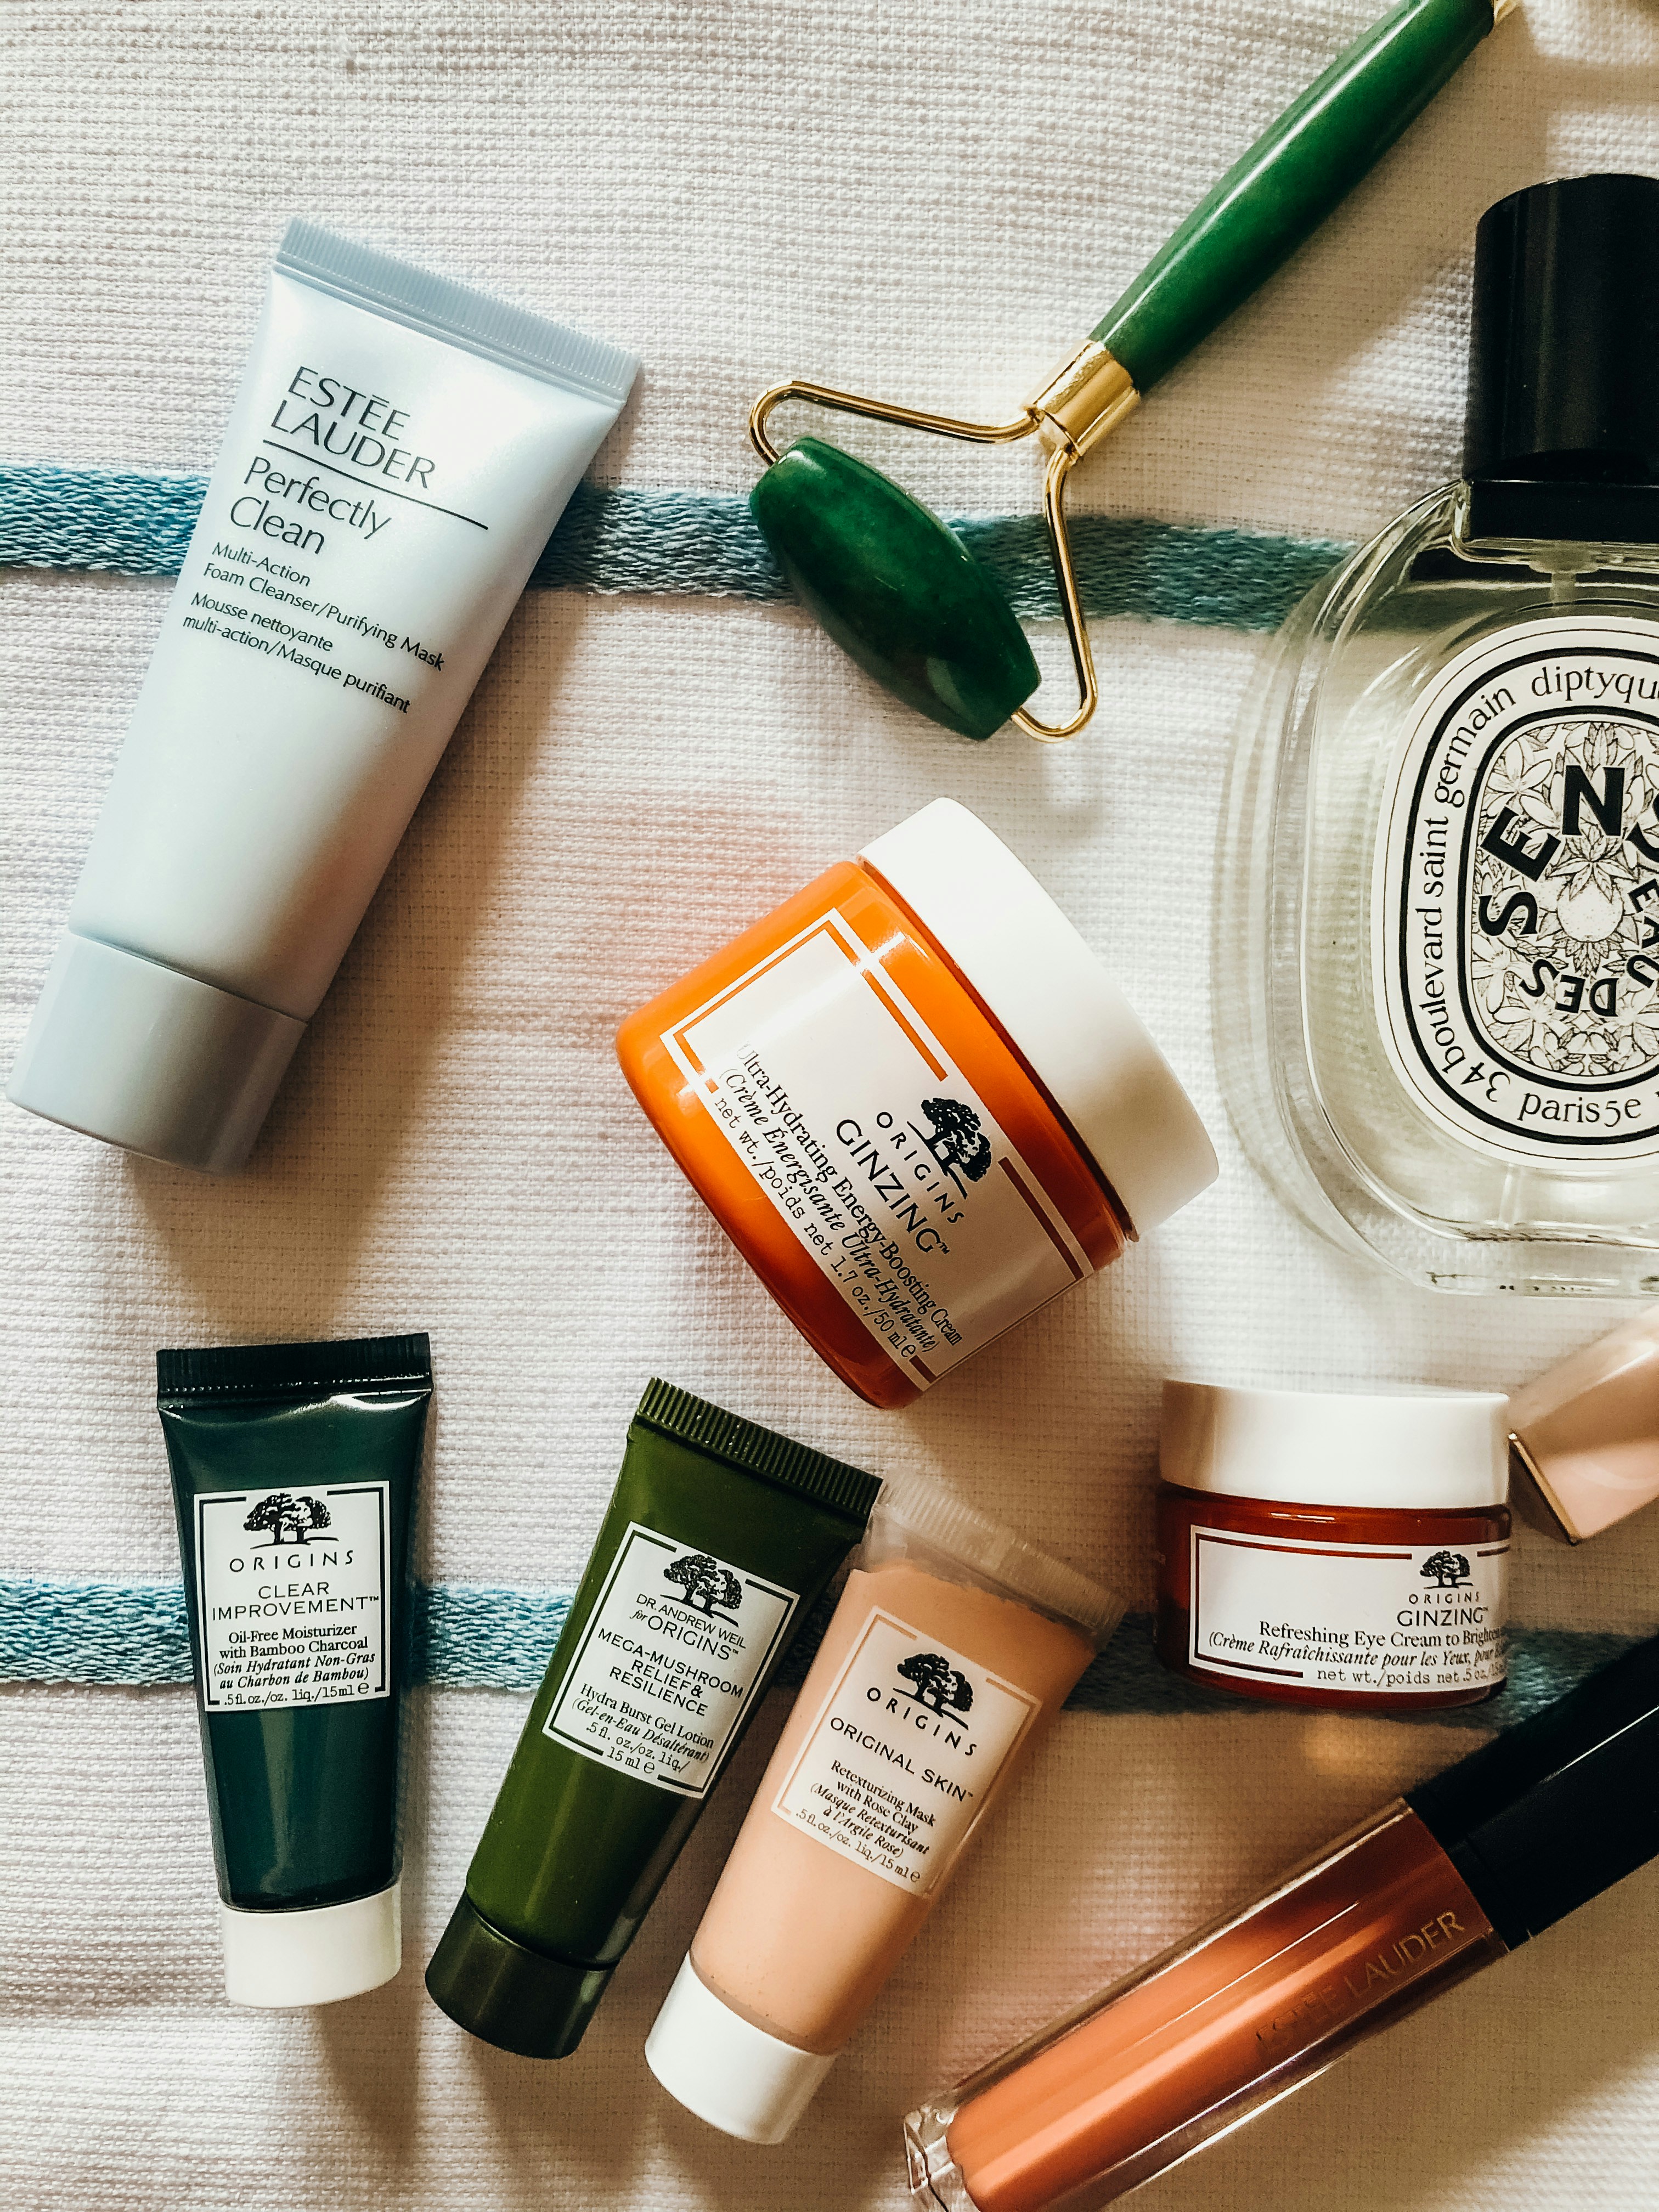 Skincare is an essential part of many people's routines